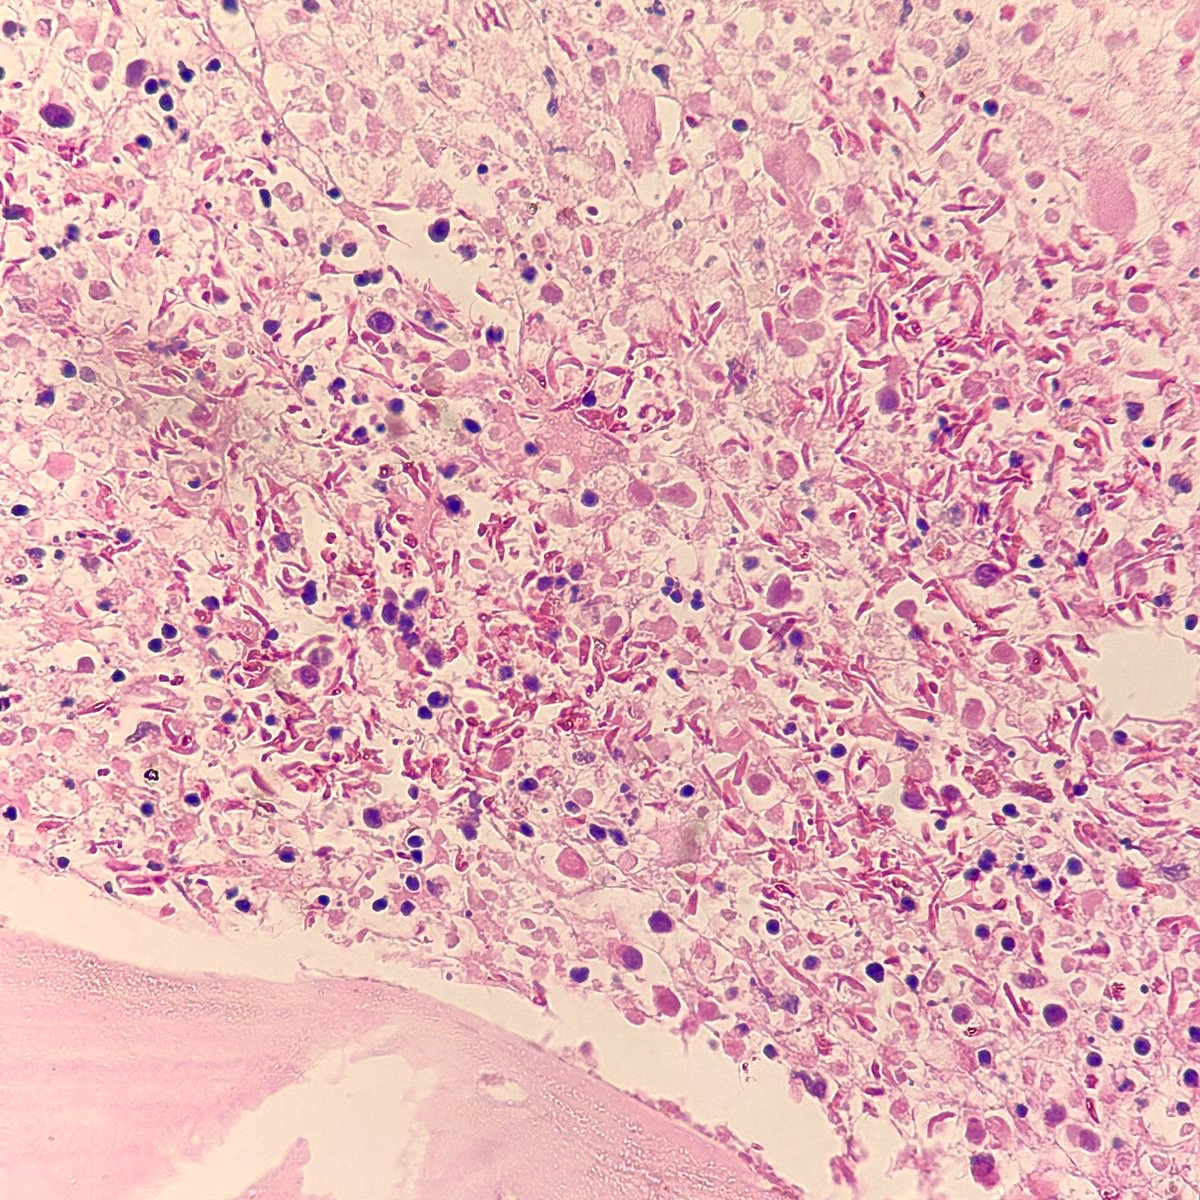 23 years old male with body pain, pancytopenia. What do you see?
#MorphologyMonday